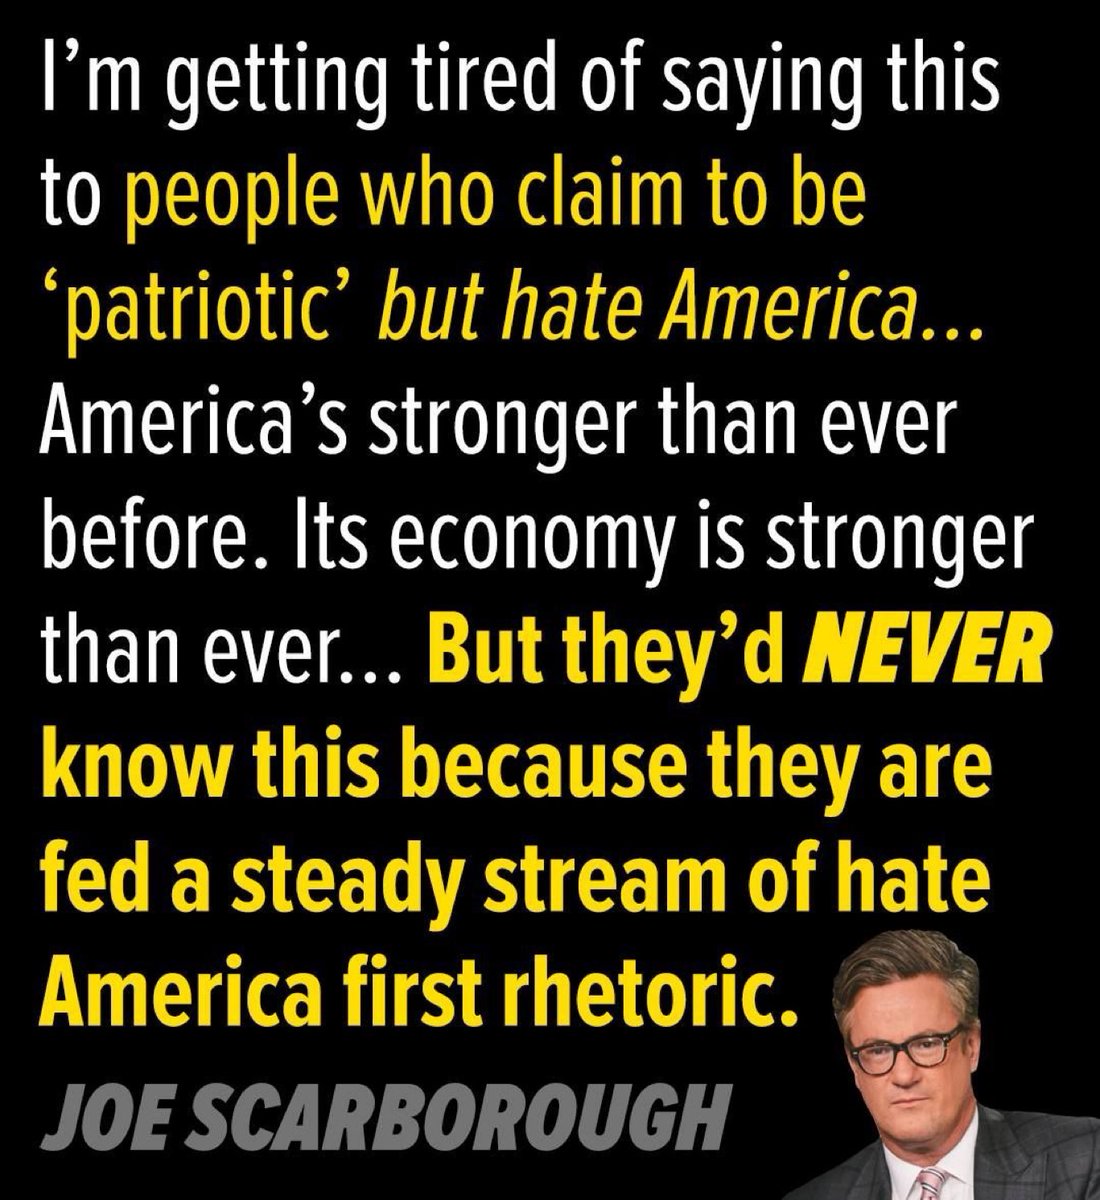 Who agrees with Joe Scarborough?